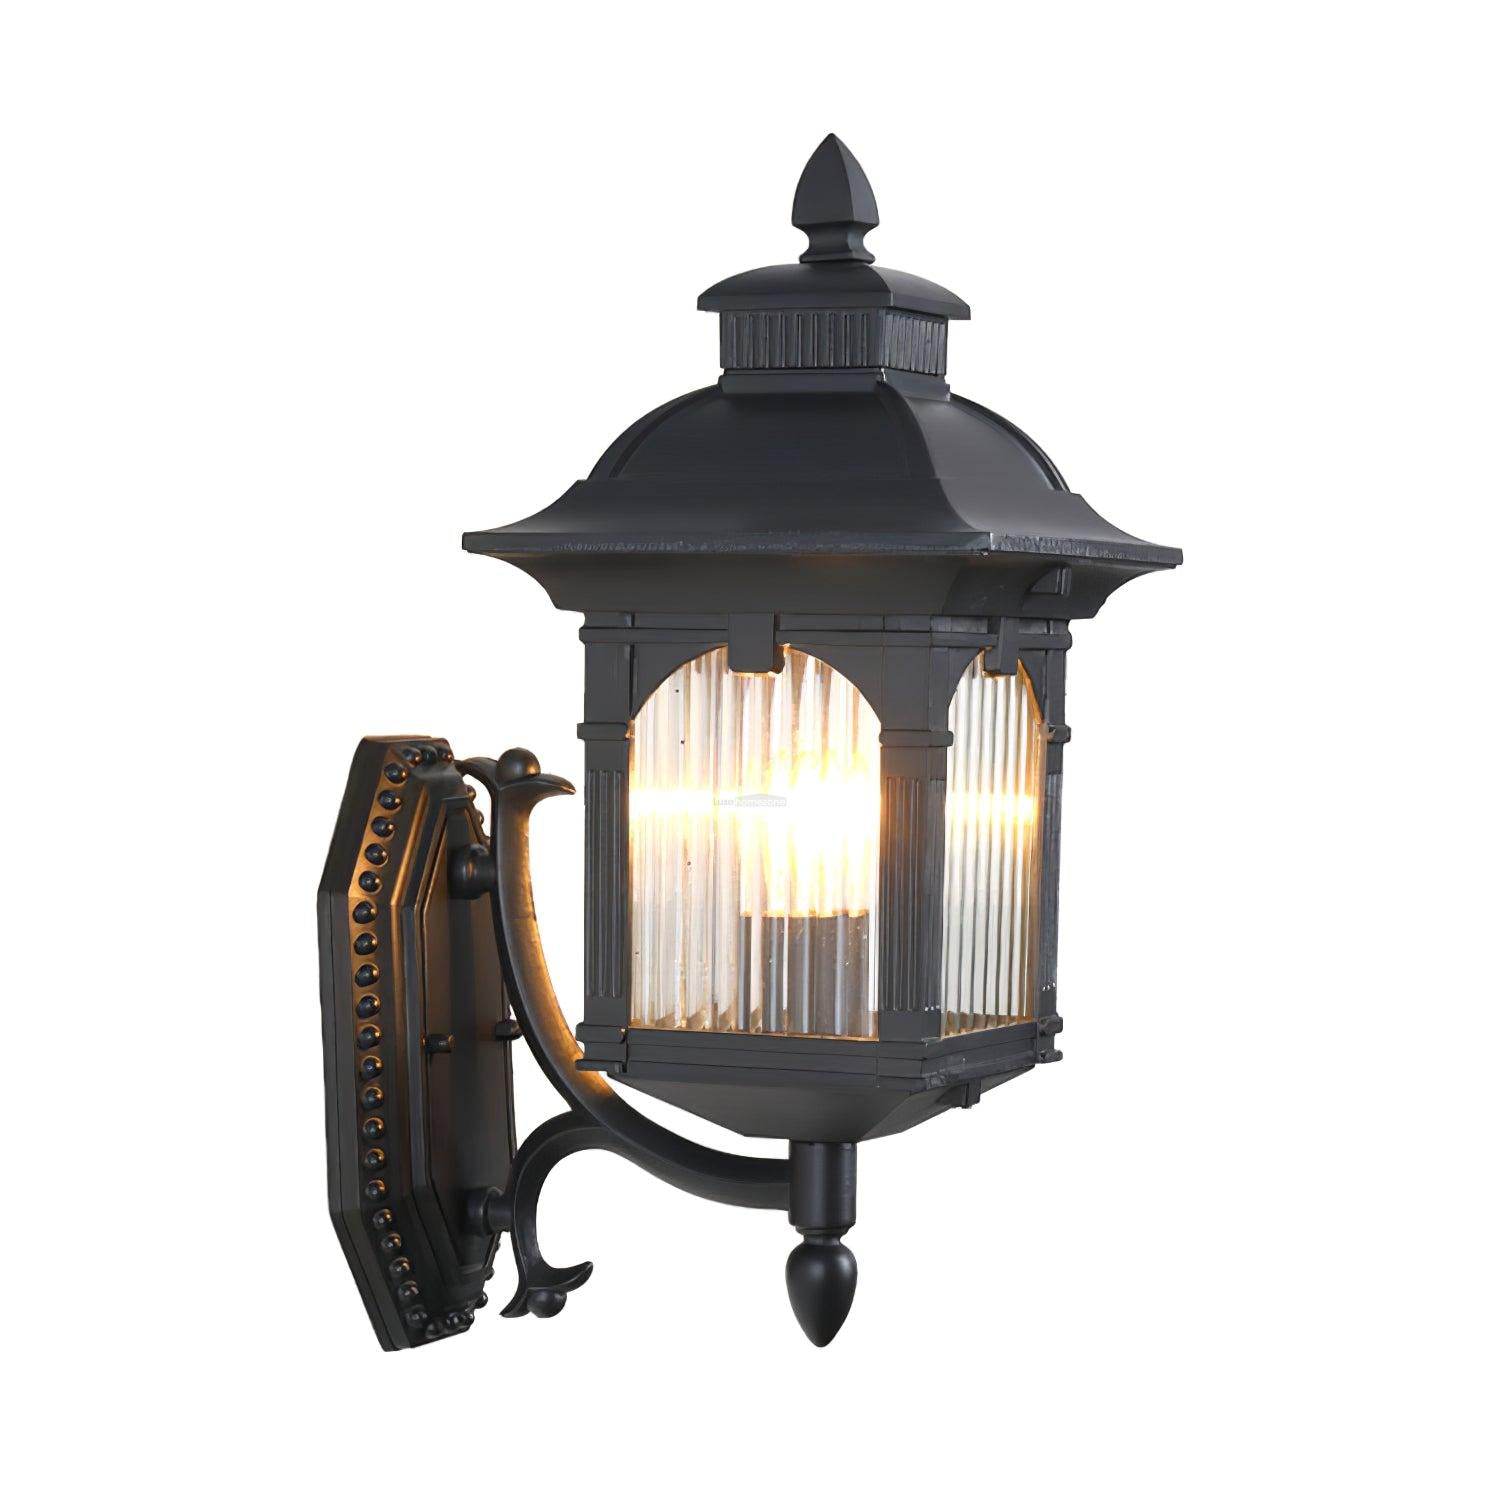 Miller Roof Wall Lamp